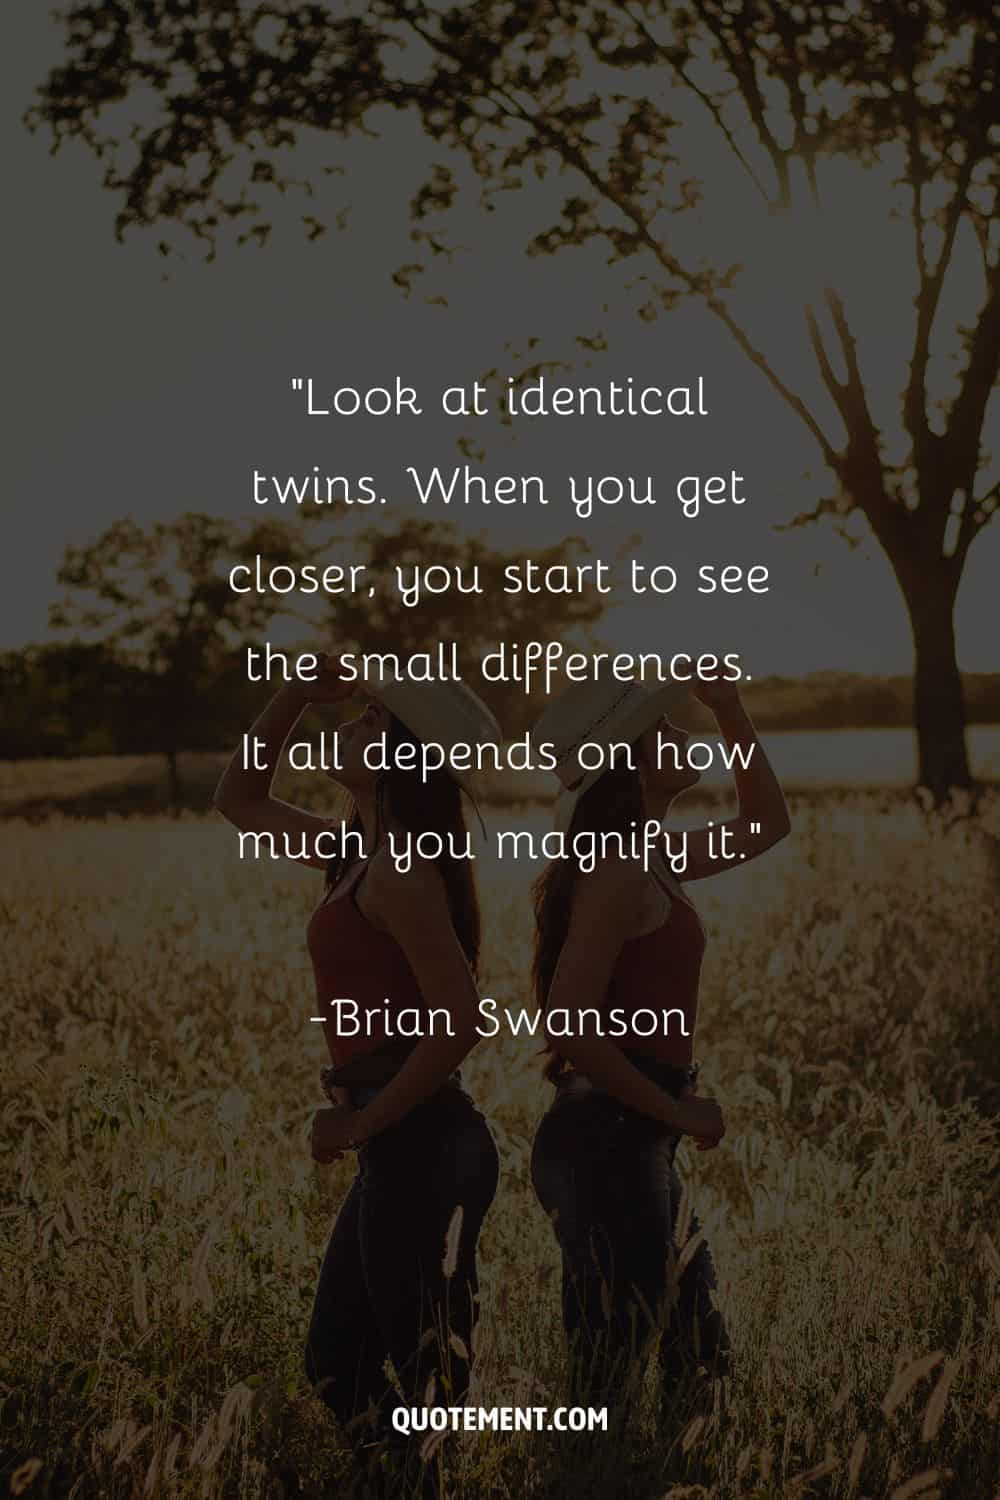 “Look at identical twins. When you get closer, you start to see the small differences. It all depends on how much you magnify it.” – Brian Swanson